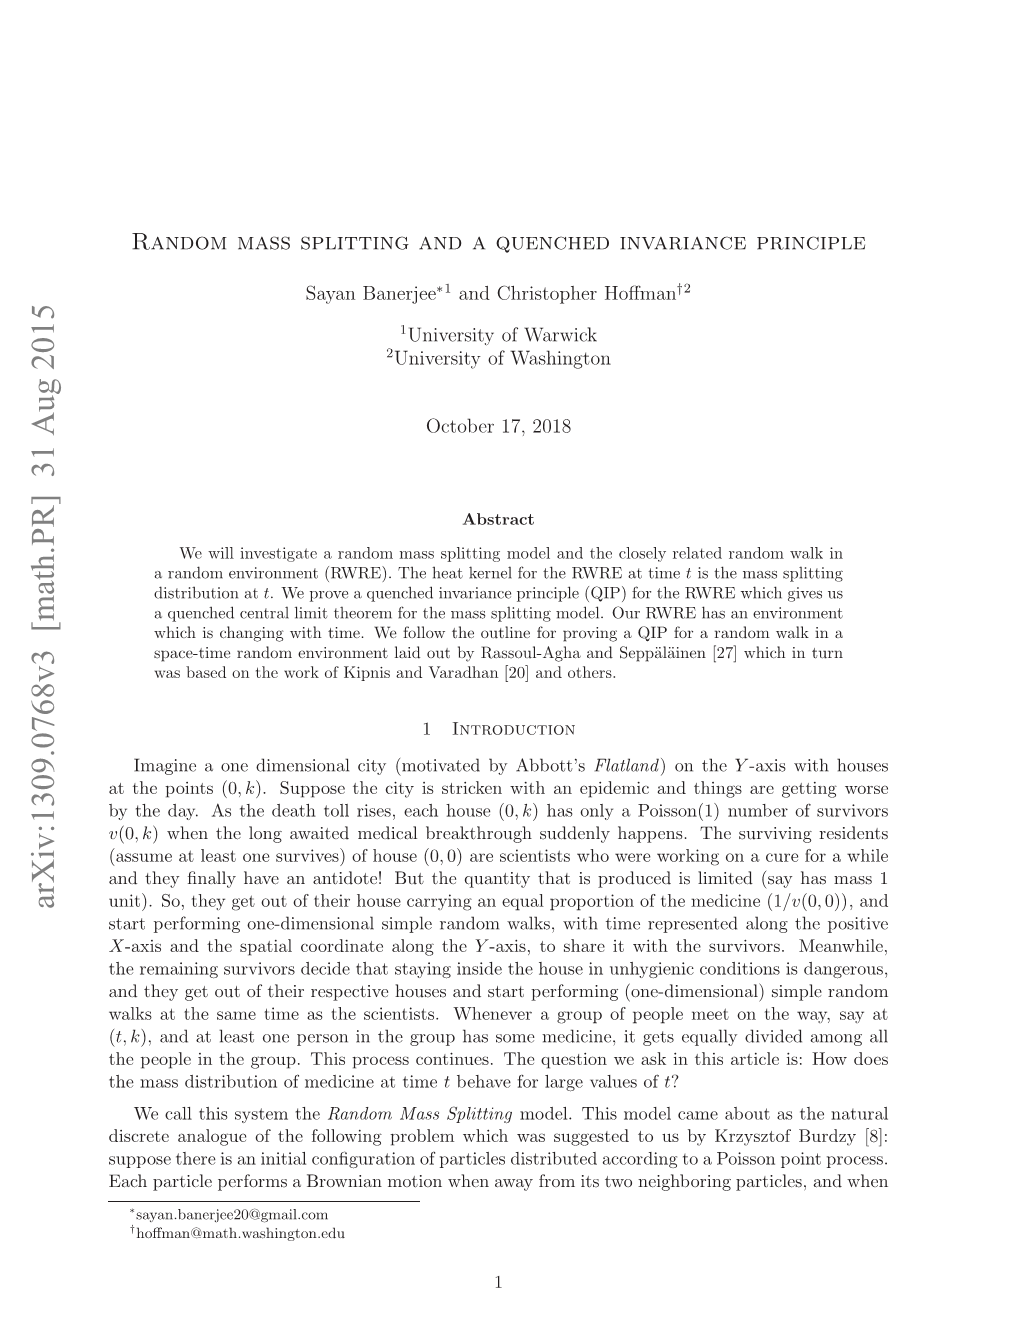 Random Mass Splitting and a Quenched Invariance Principle